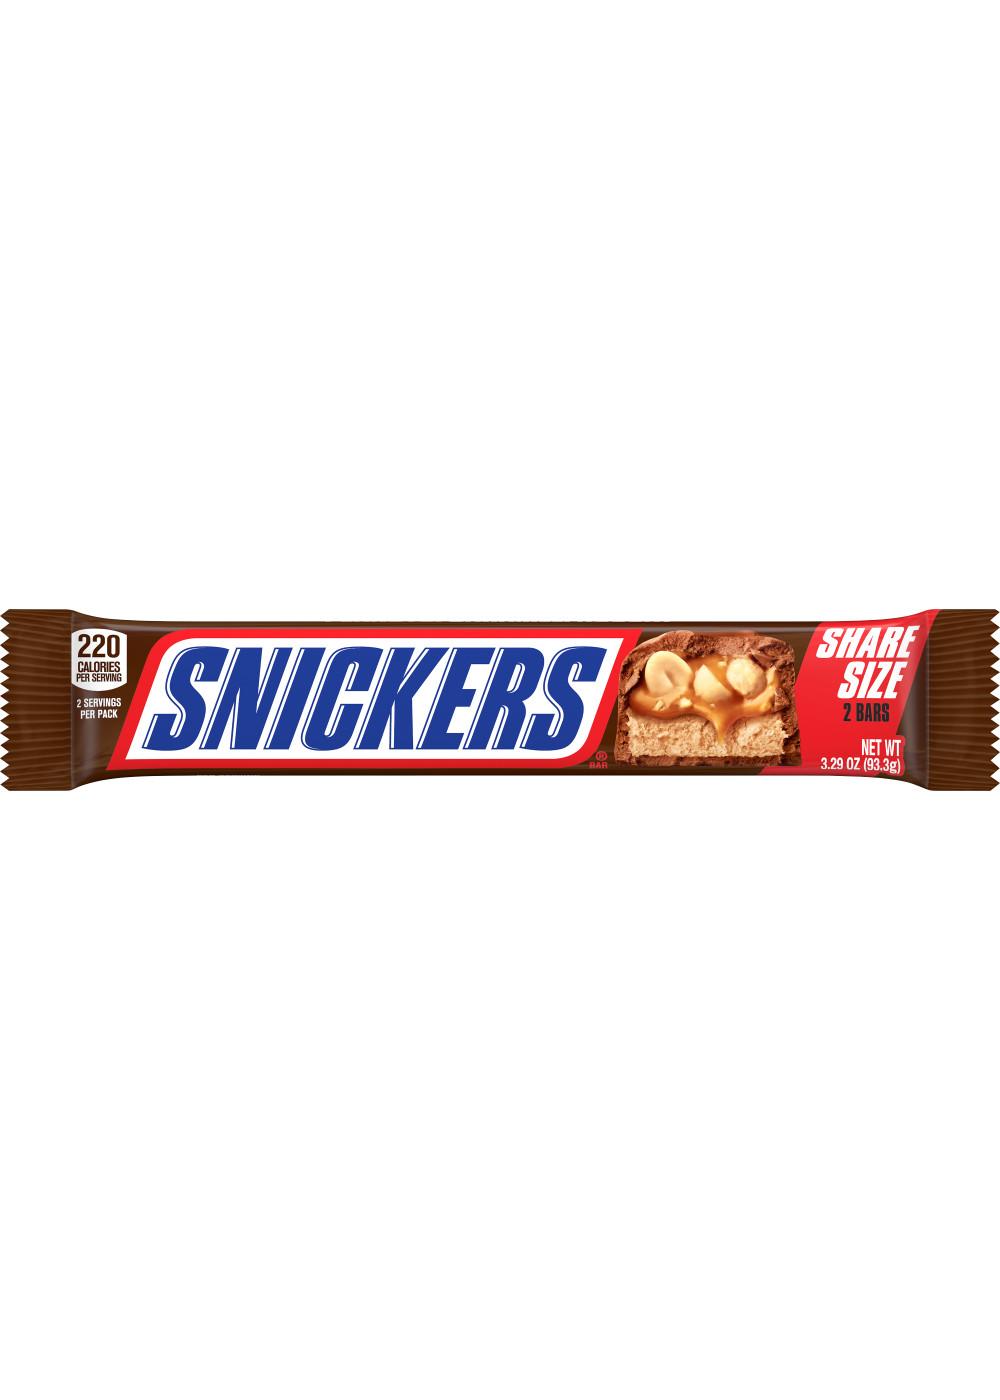 Snickers Milk Chocolate Candy Bar - Share Size - Shop Candy at H-E-B